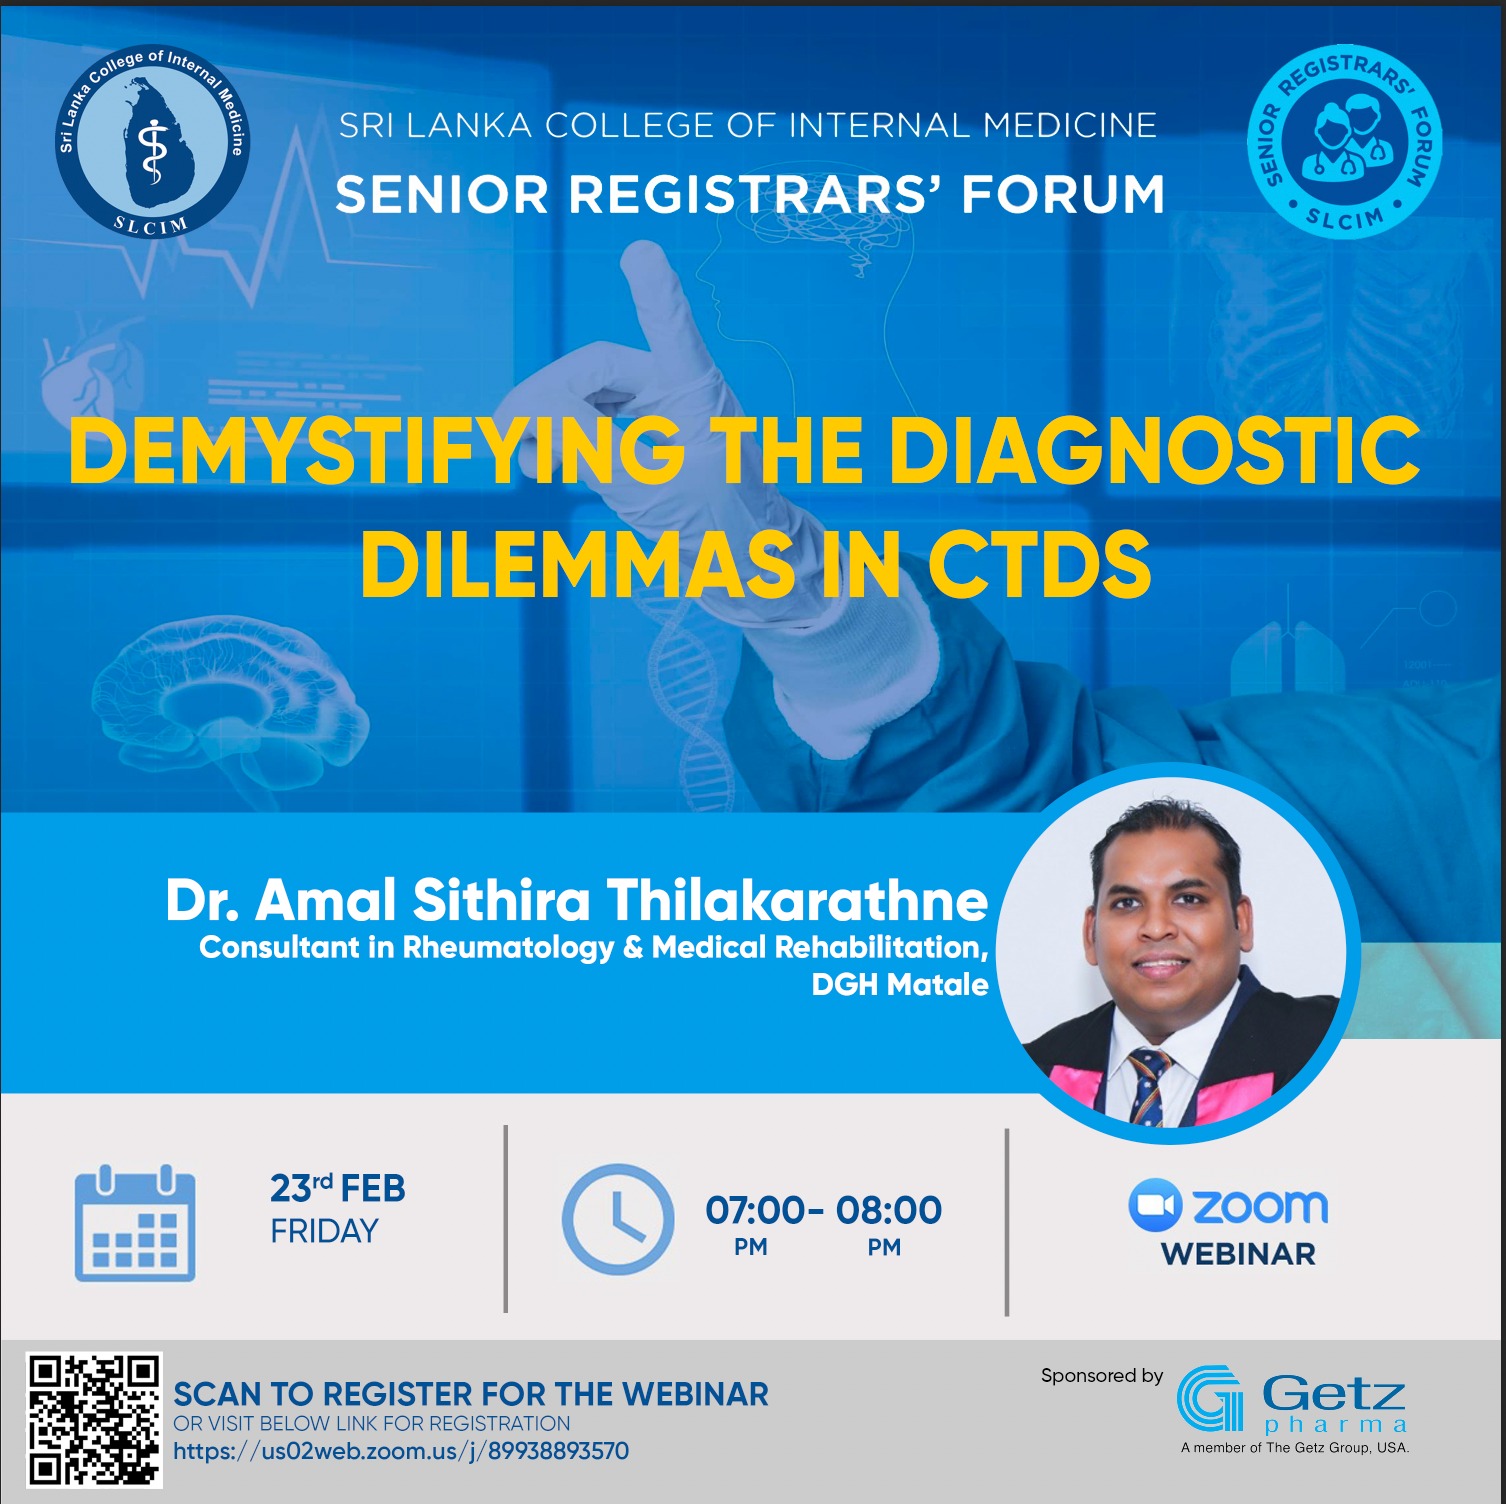 Demystifying the diagnostic dilemmas in CTDs